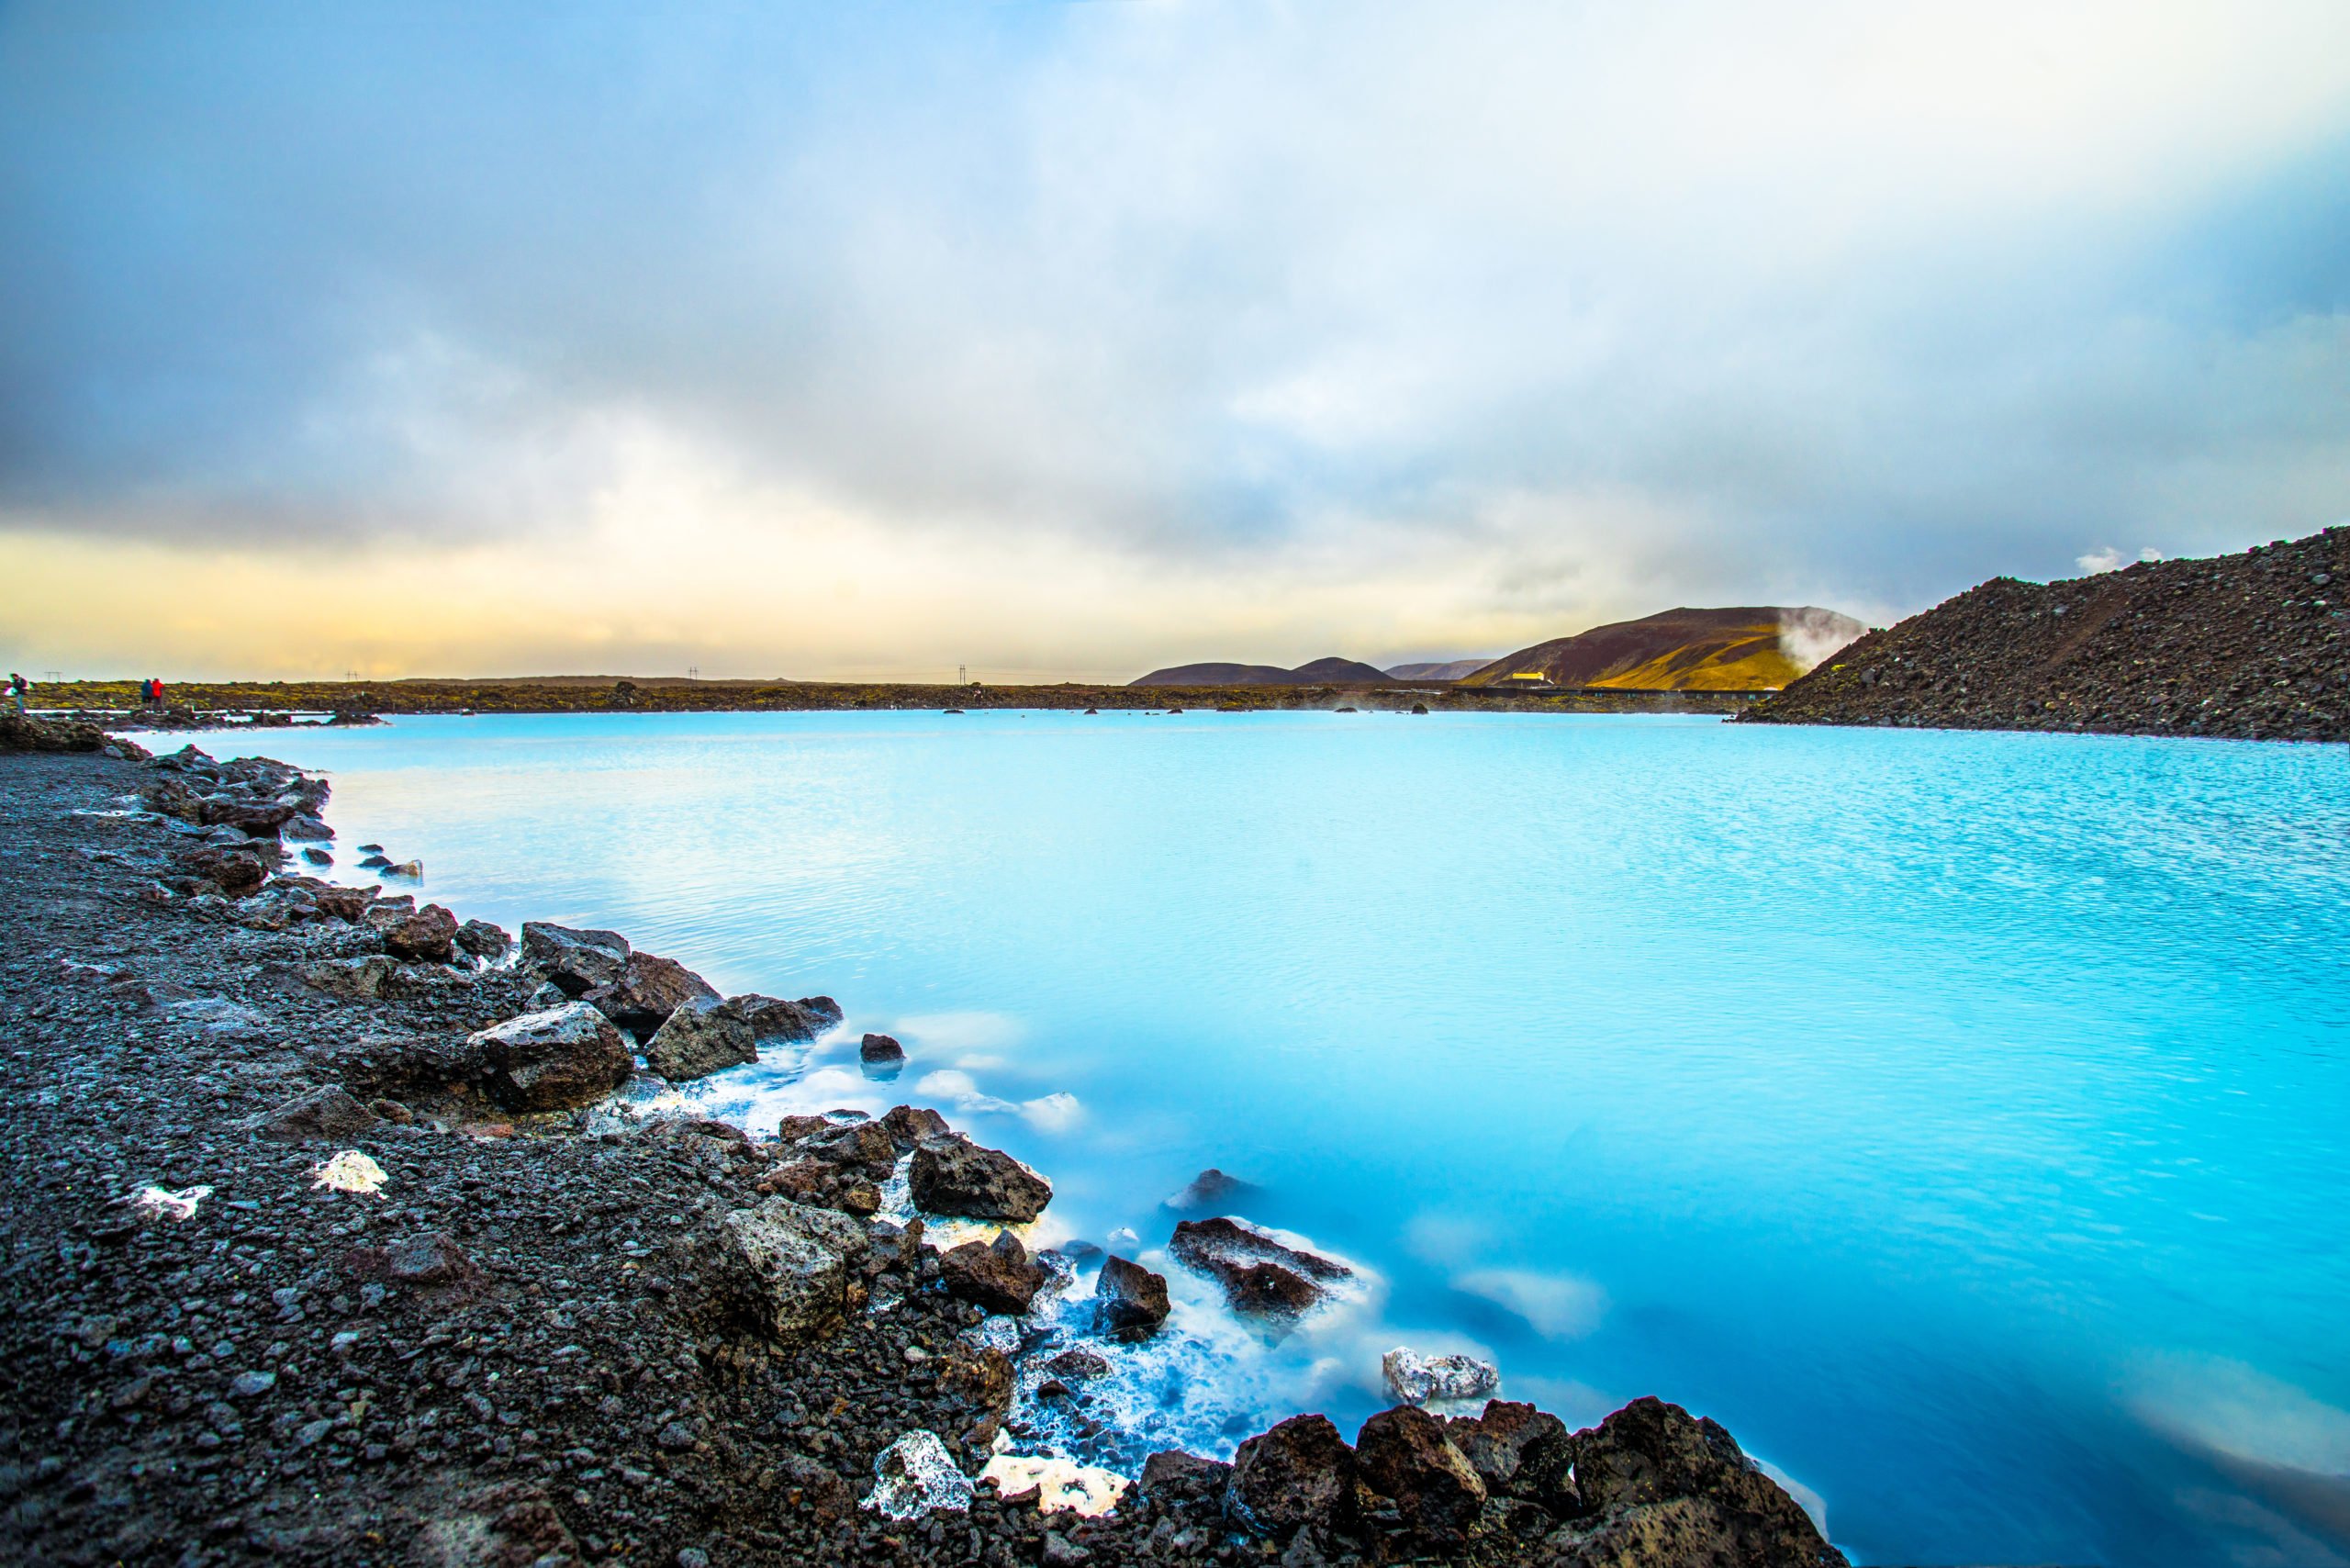 Visit The Amazing Iceland Blue Lagoon In Our Blue Lagoon & Northern Lights Tour